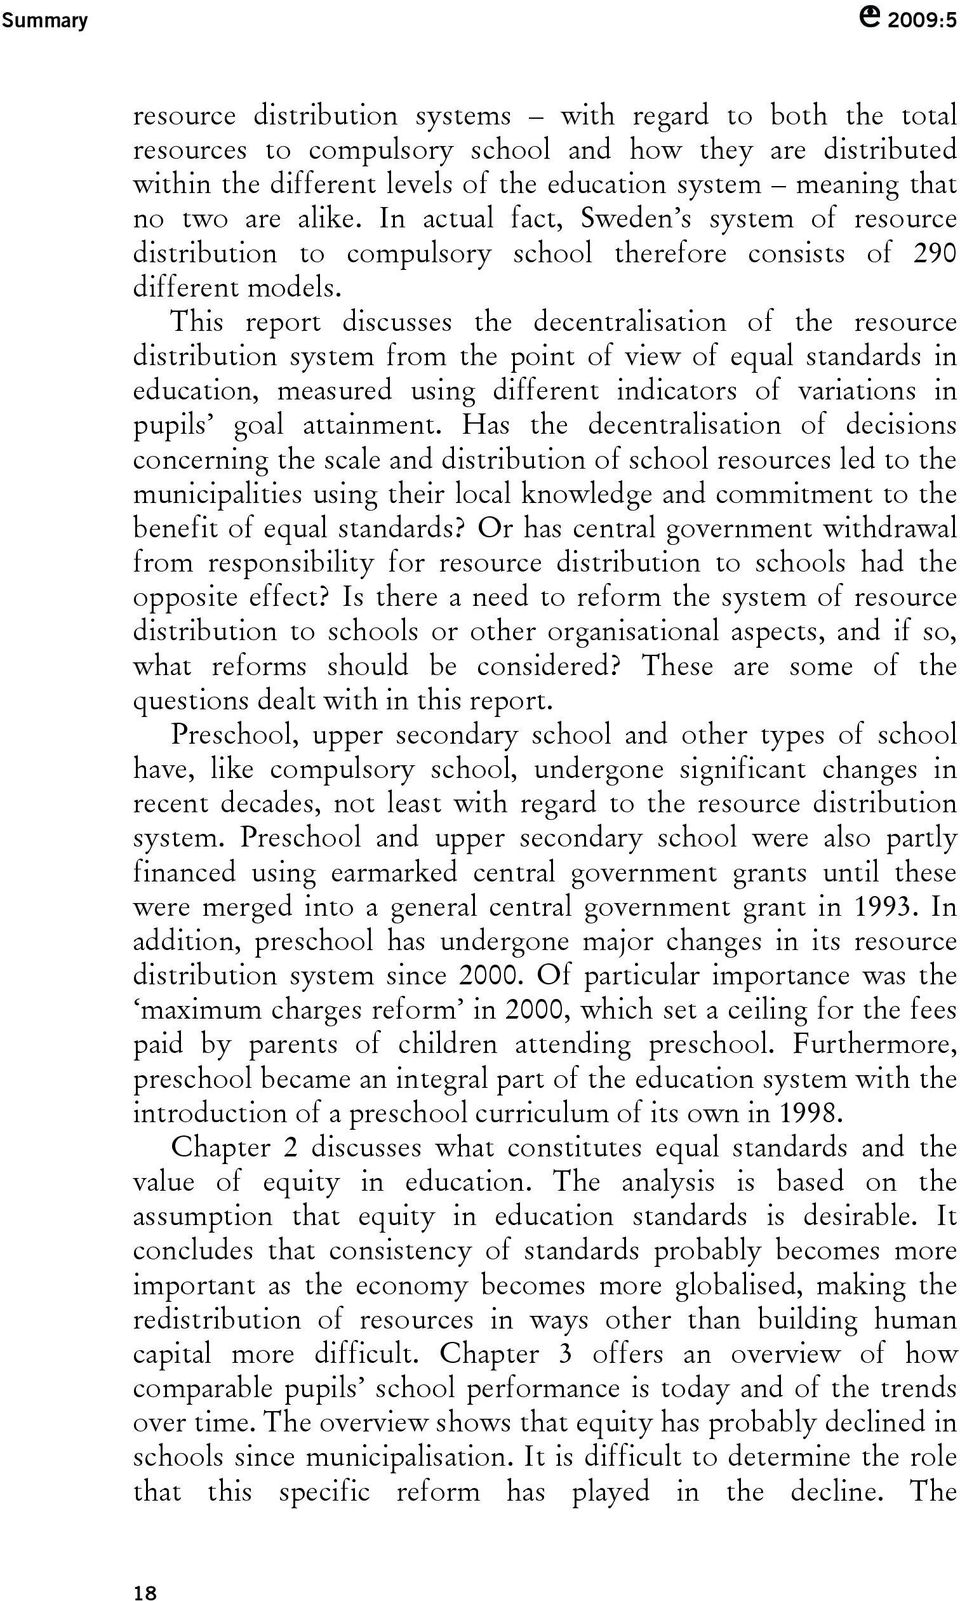 This report discusses the decentralisation of the resource distribution system from the point of view of equal standards in education, measured using different indicators of variations in pupils goal